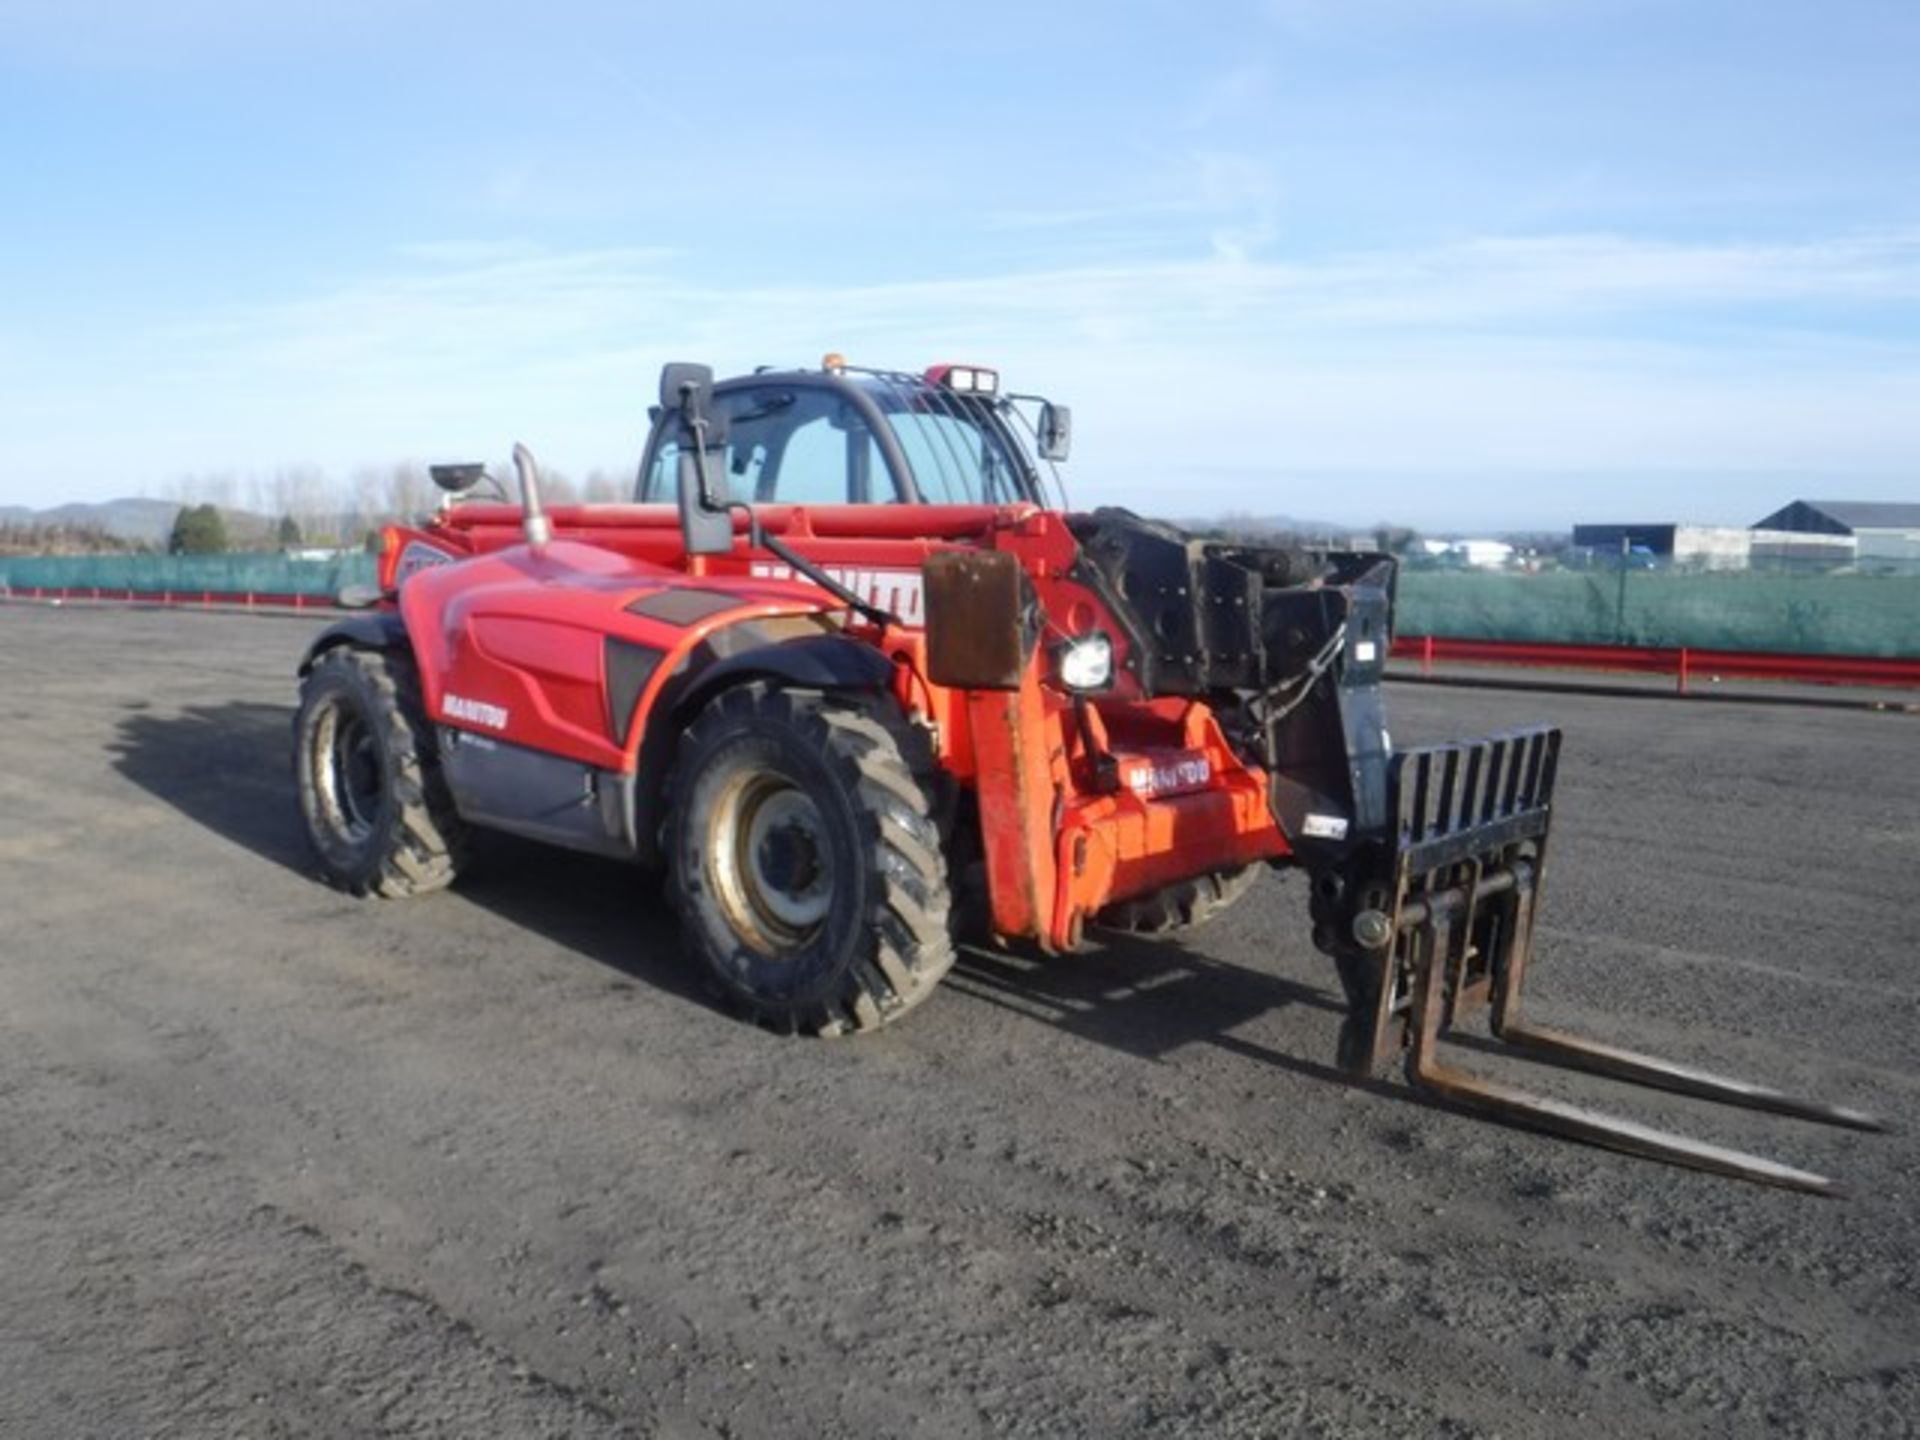 2012 MANITOU MT1840 telehandler c/w pallet forks. CE marked. Lift capacity 4000kg. Max reach 18m. Re - Image 4 of 12